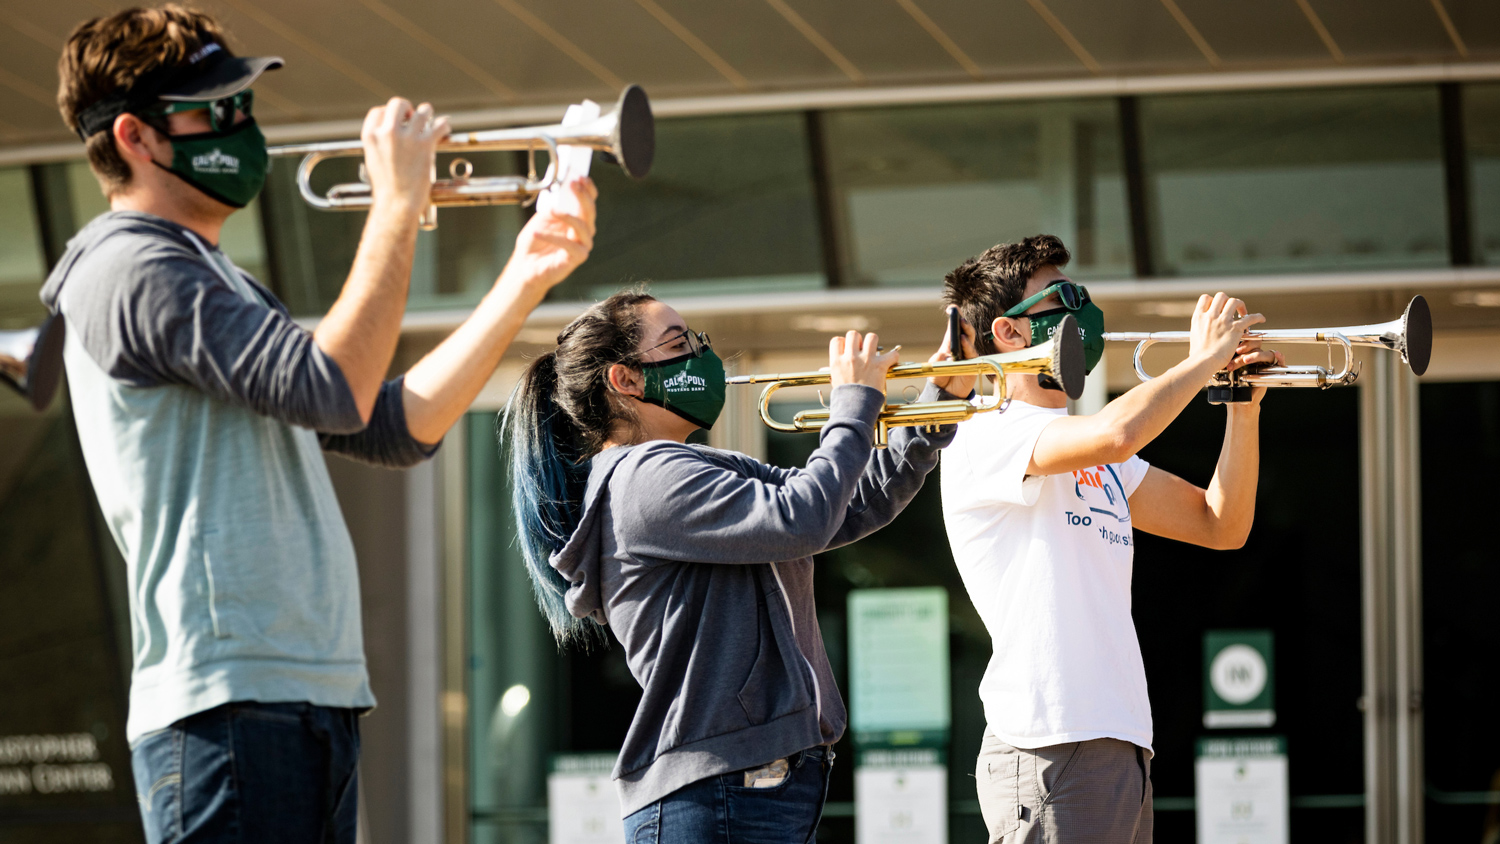 Three musicians play trumpet wearing face coverings and using filtration materials on bell covers